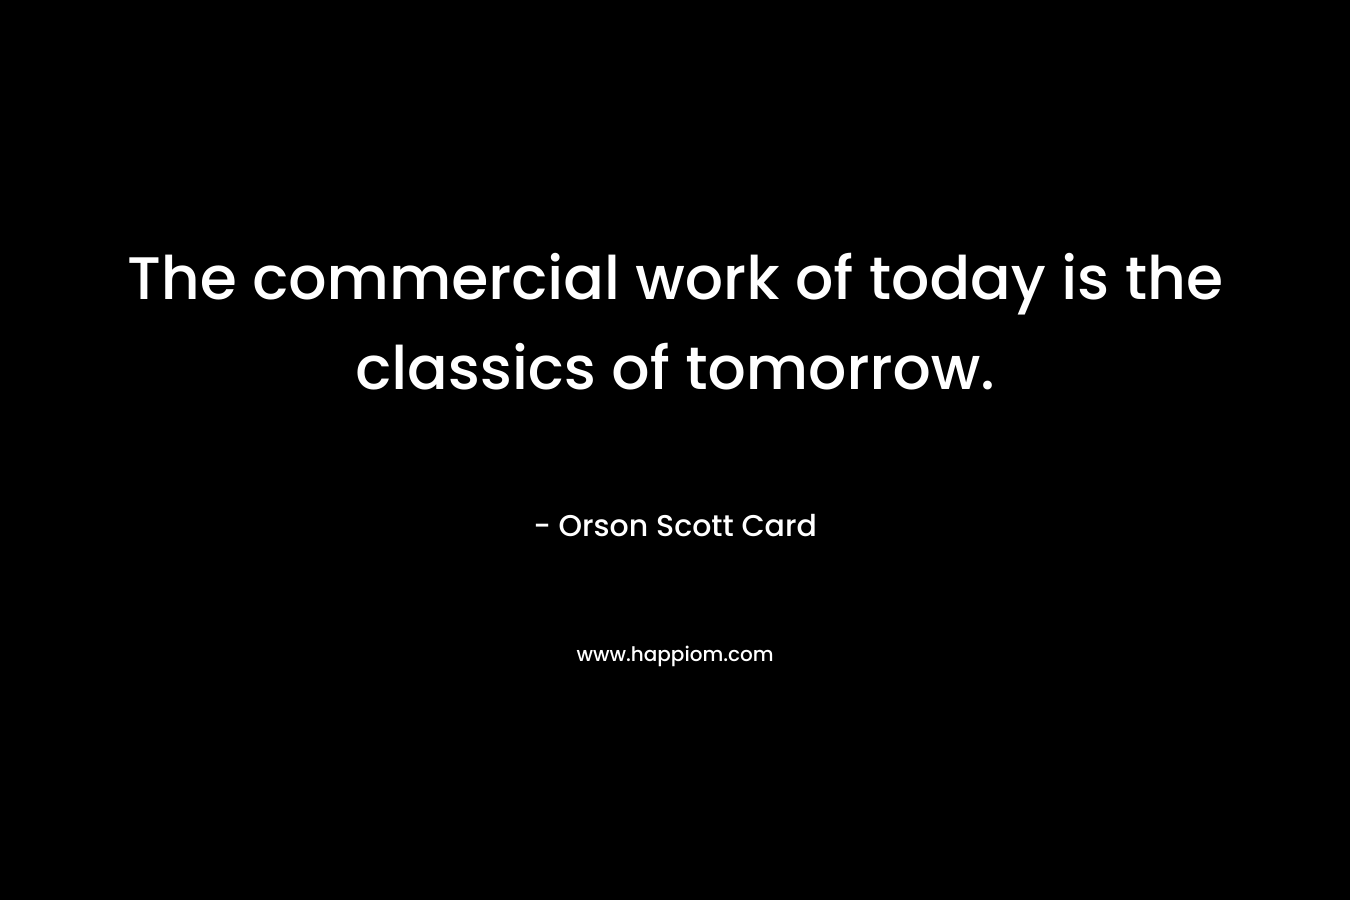 The commercial work of today is the classics of tomorrow.